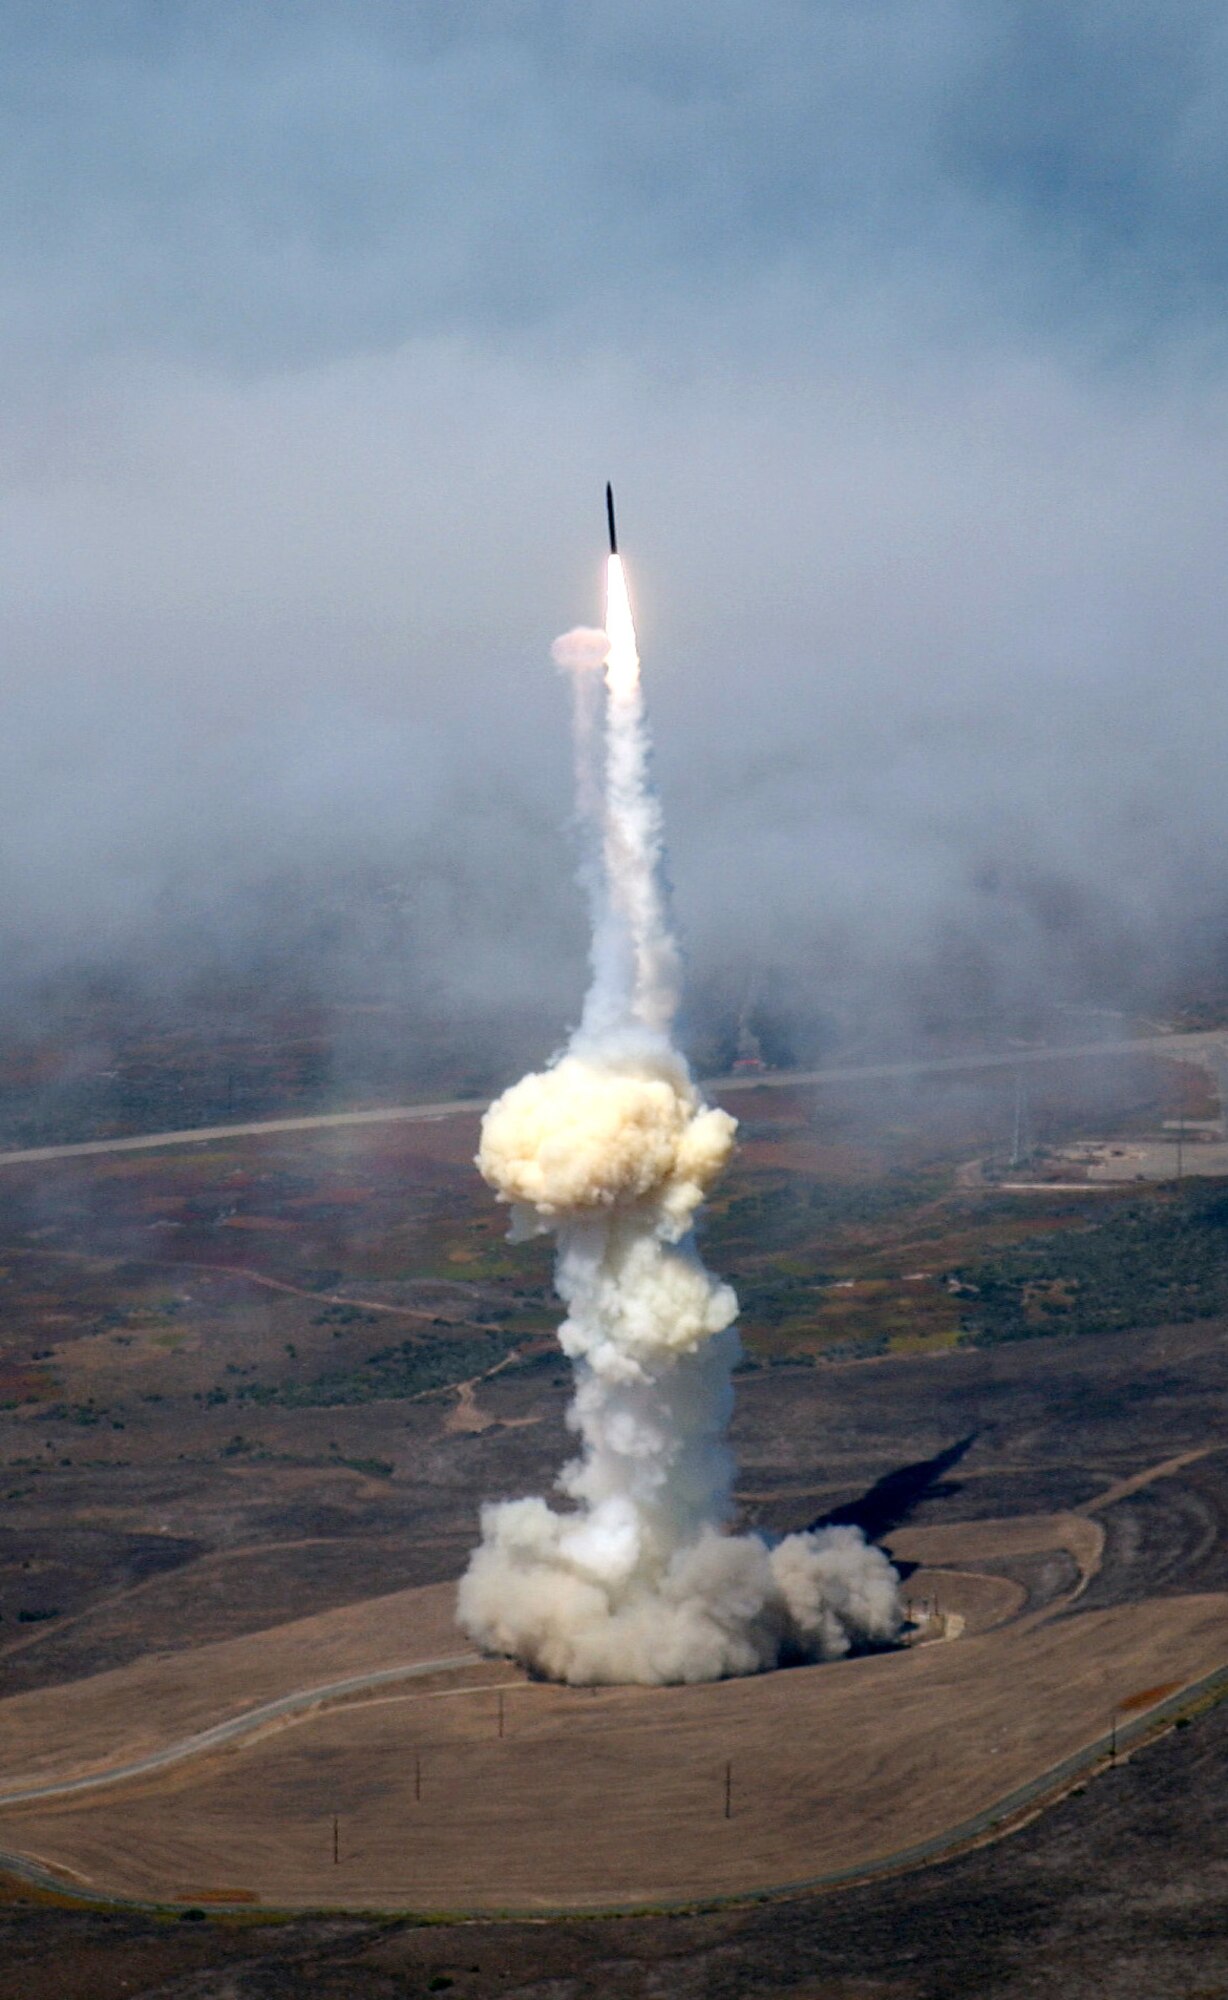 VANDENBERG AIR FORCE BASE, Calif. -- A ground-based interceptor prototype booster successfully launched from here Aug. 16, supporting the Ground-based Midcourse Defense program of the Missile Defense Agency.  (U.S. Air Force photo by Master Sgt. Bruce Dzitko)